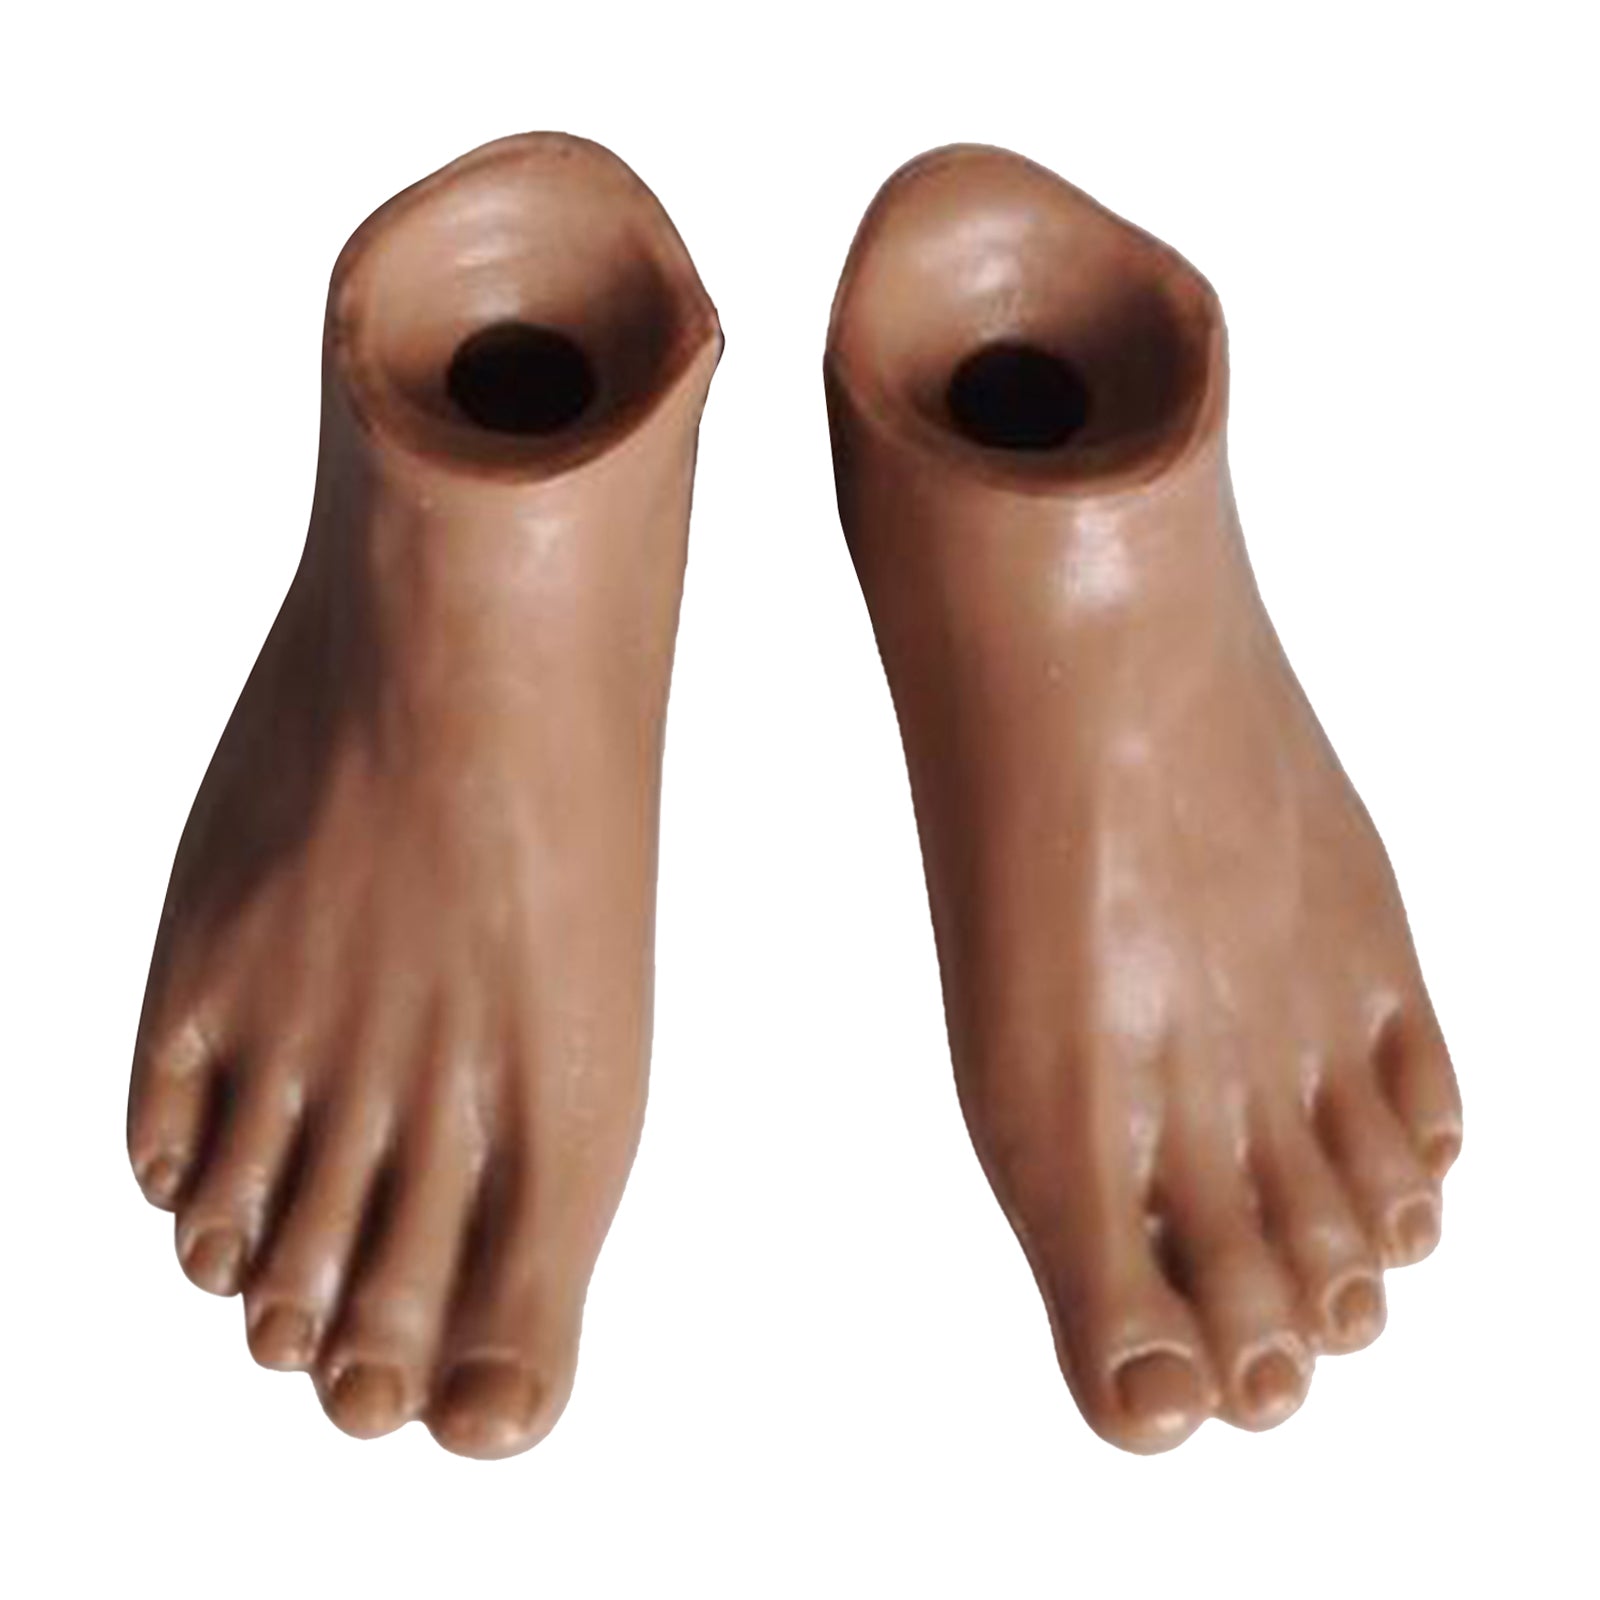 Nude Male / Female 1/6 Scale Action Figure Pair of Feet  Style 5